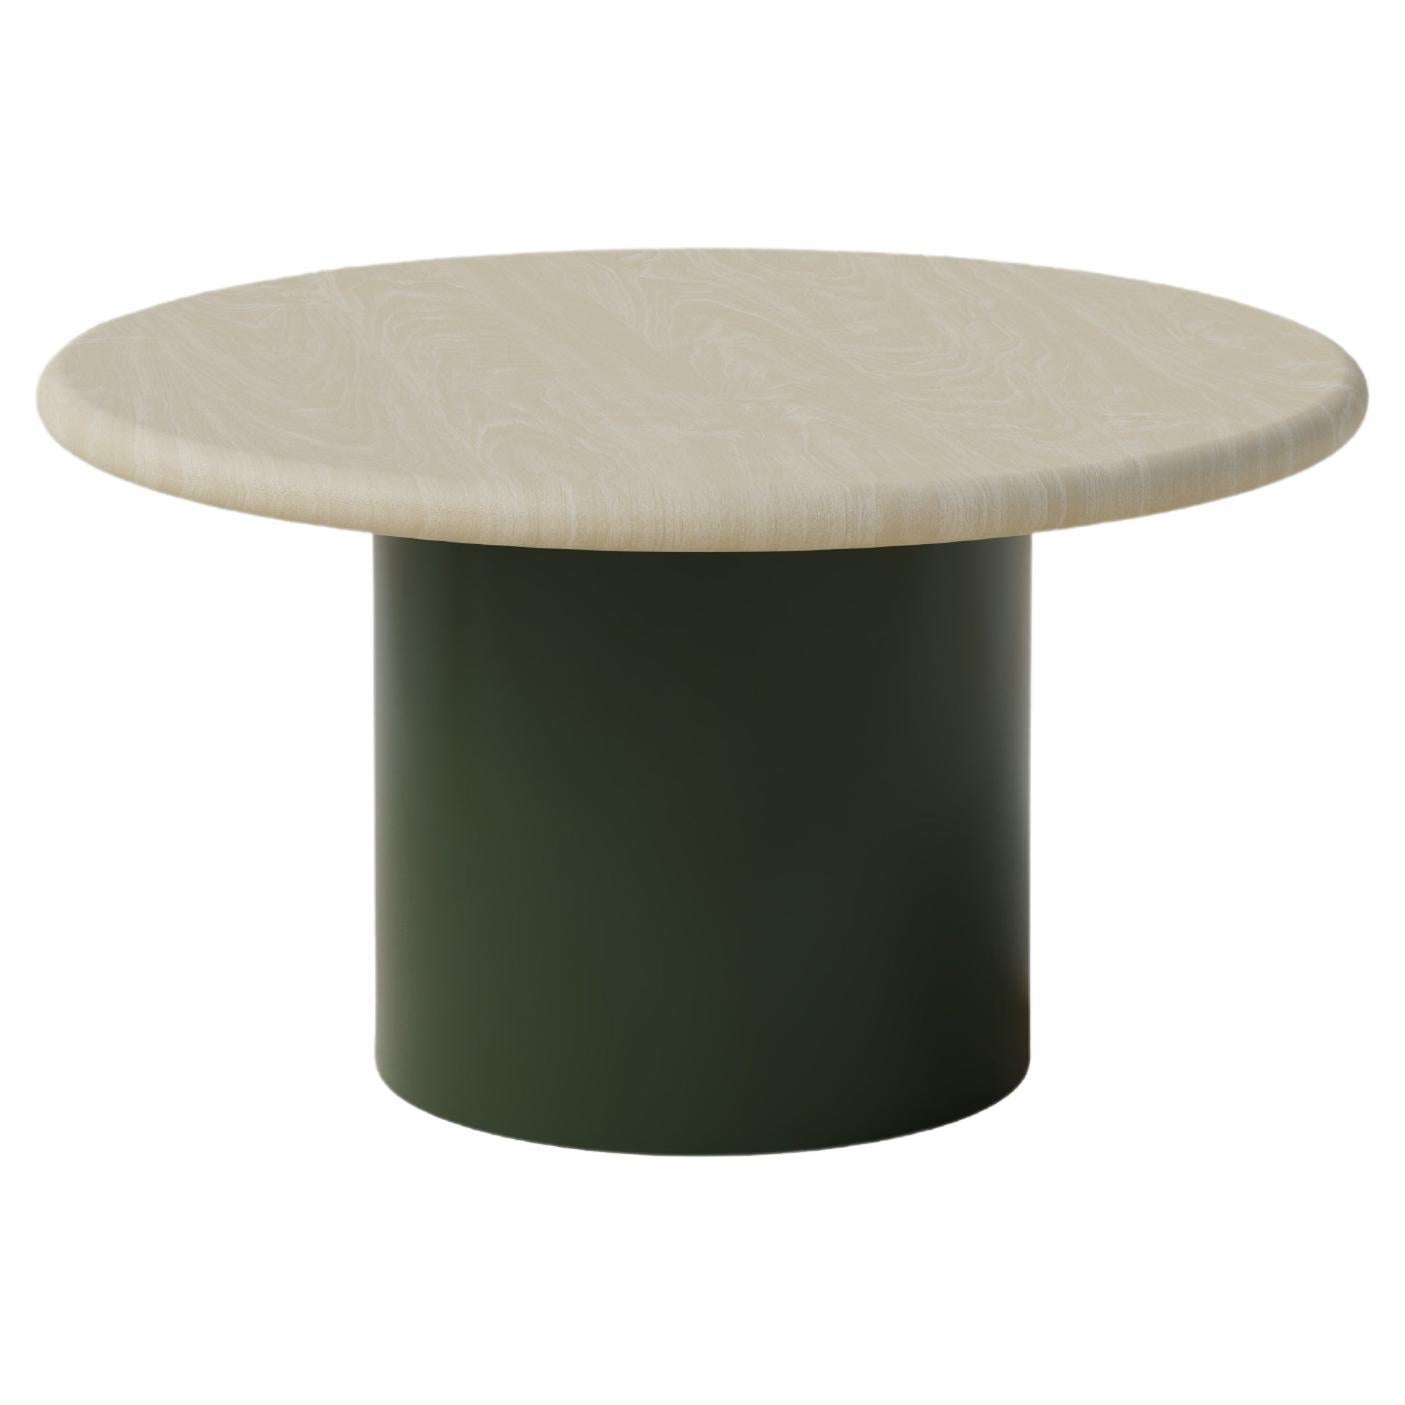 Raindrop Coffee Table, 600, Ash / Moss Green For Sale